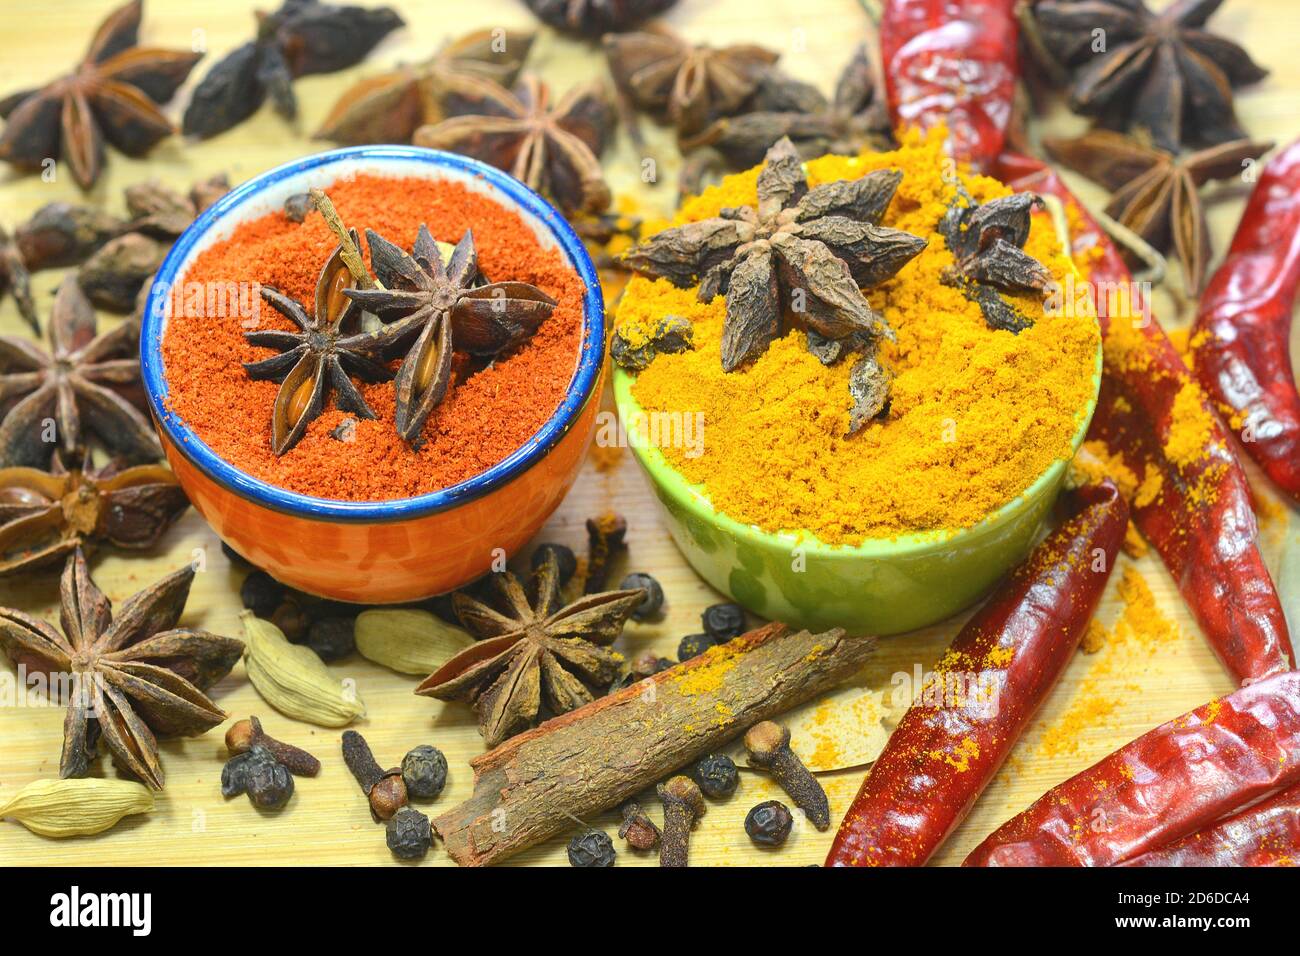 Chilli powder, turmeric powder and spices in the background. Stock Photo